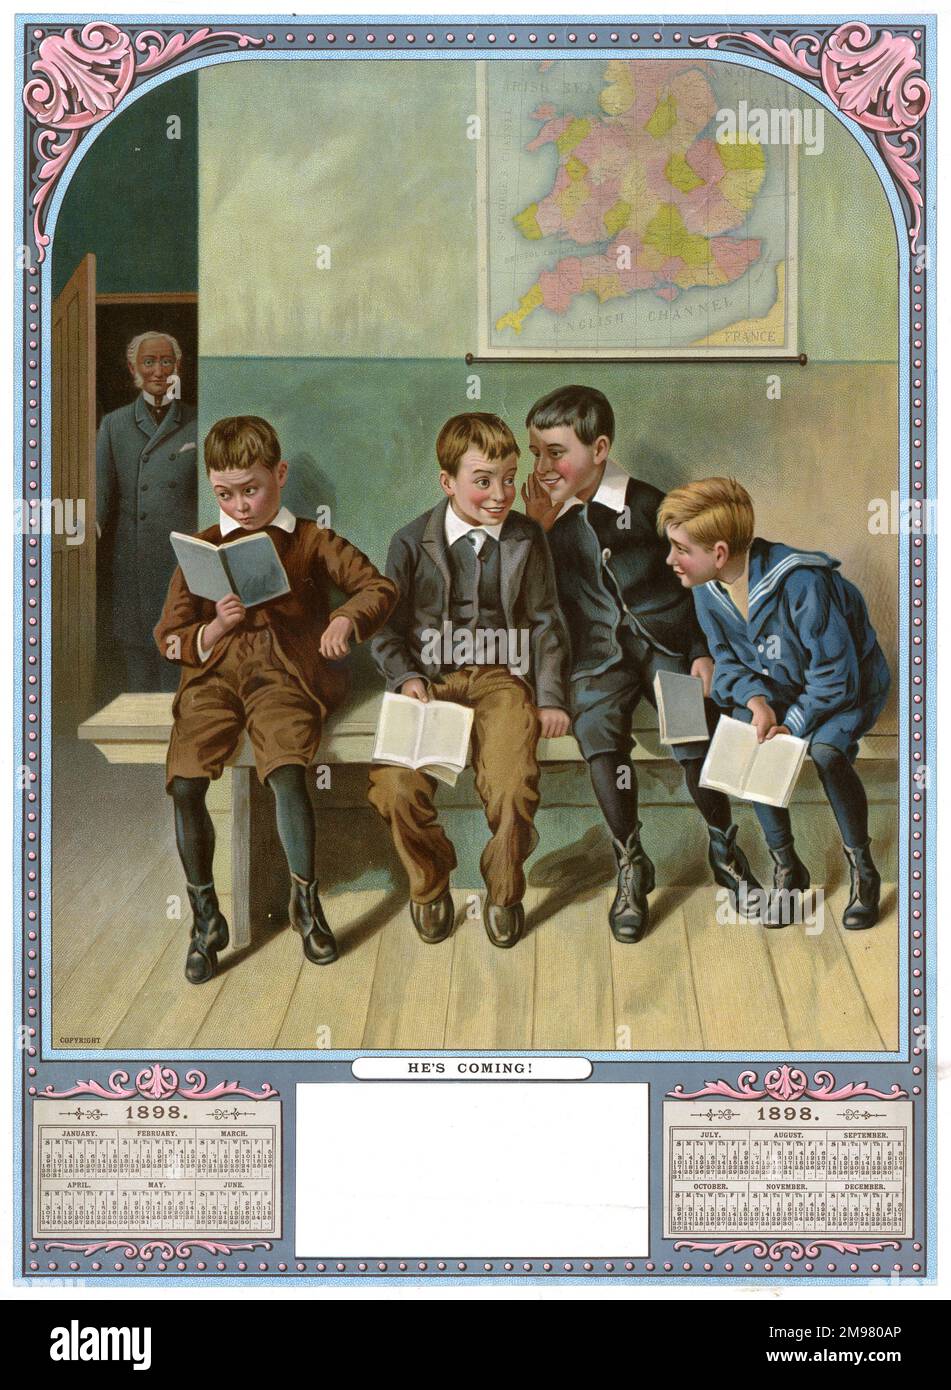 Calendar design, He's Coming -- four schoolboys sit on a bench as their teacher enters the room. Stock Photo